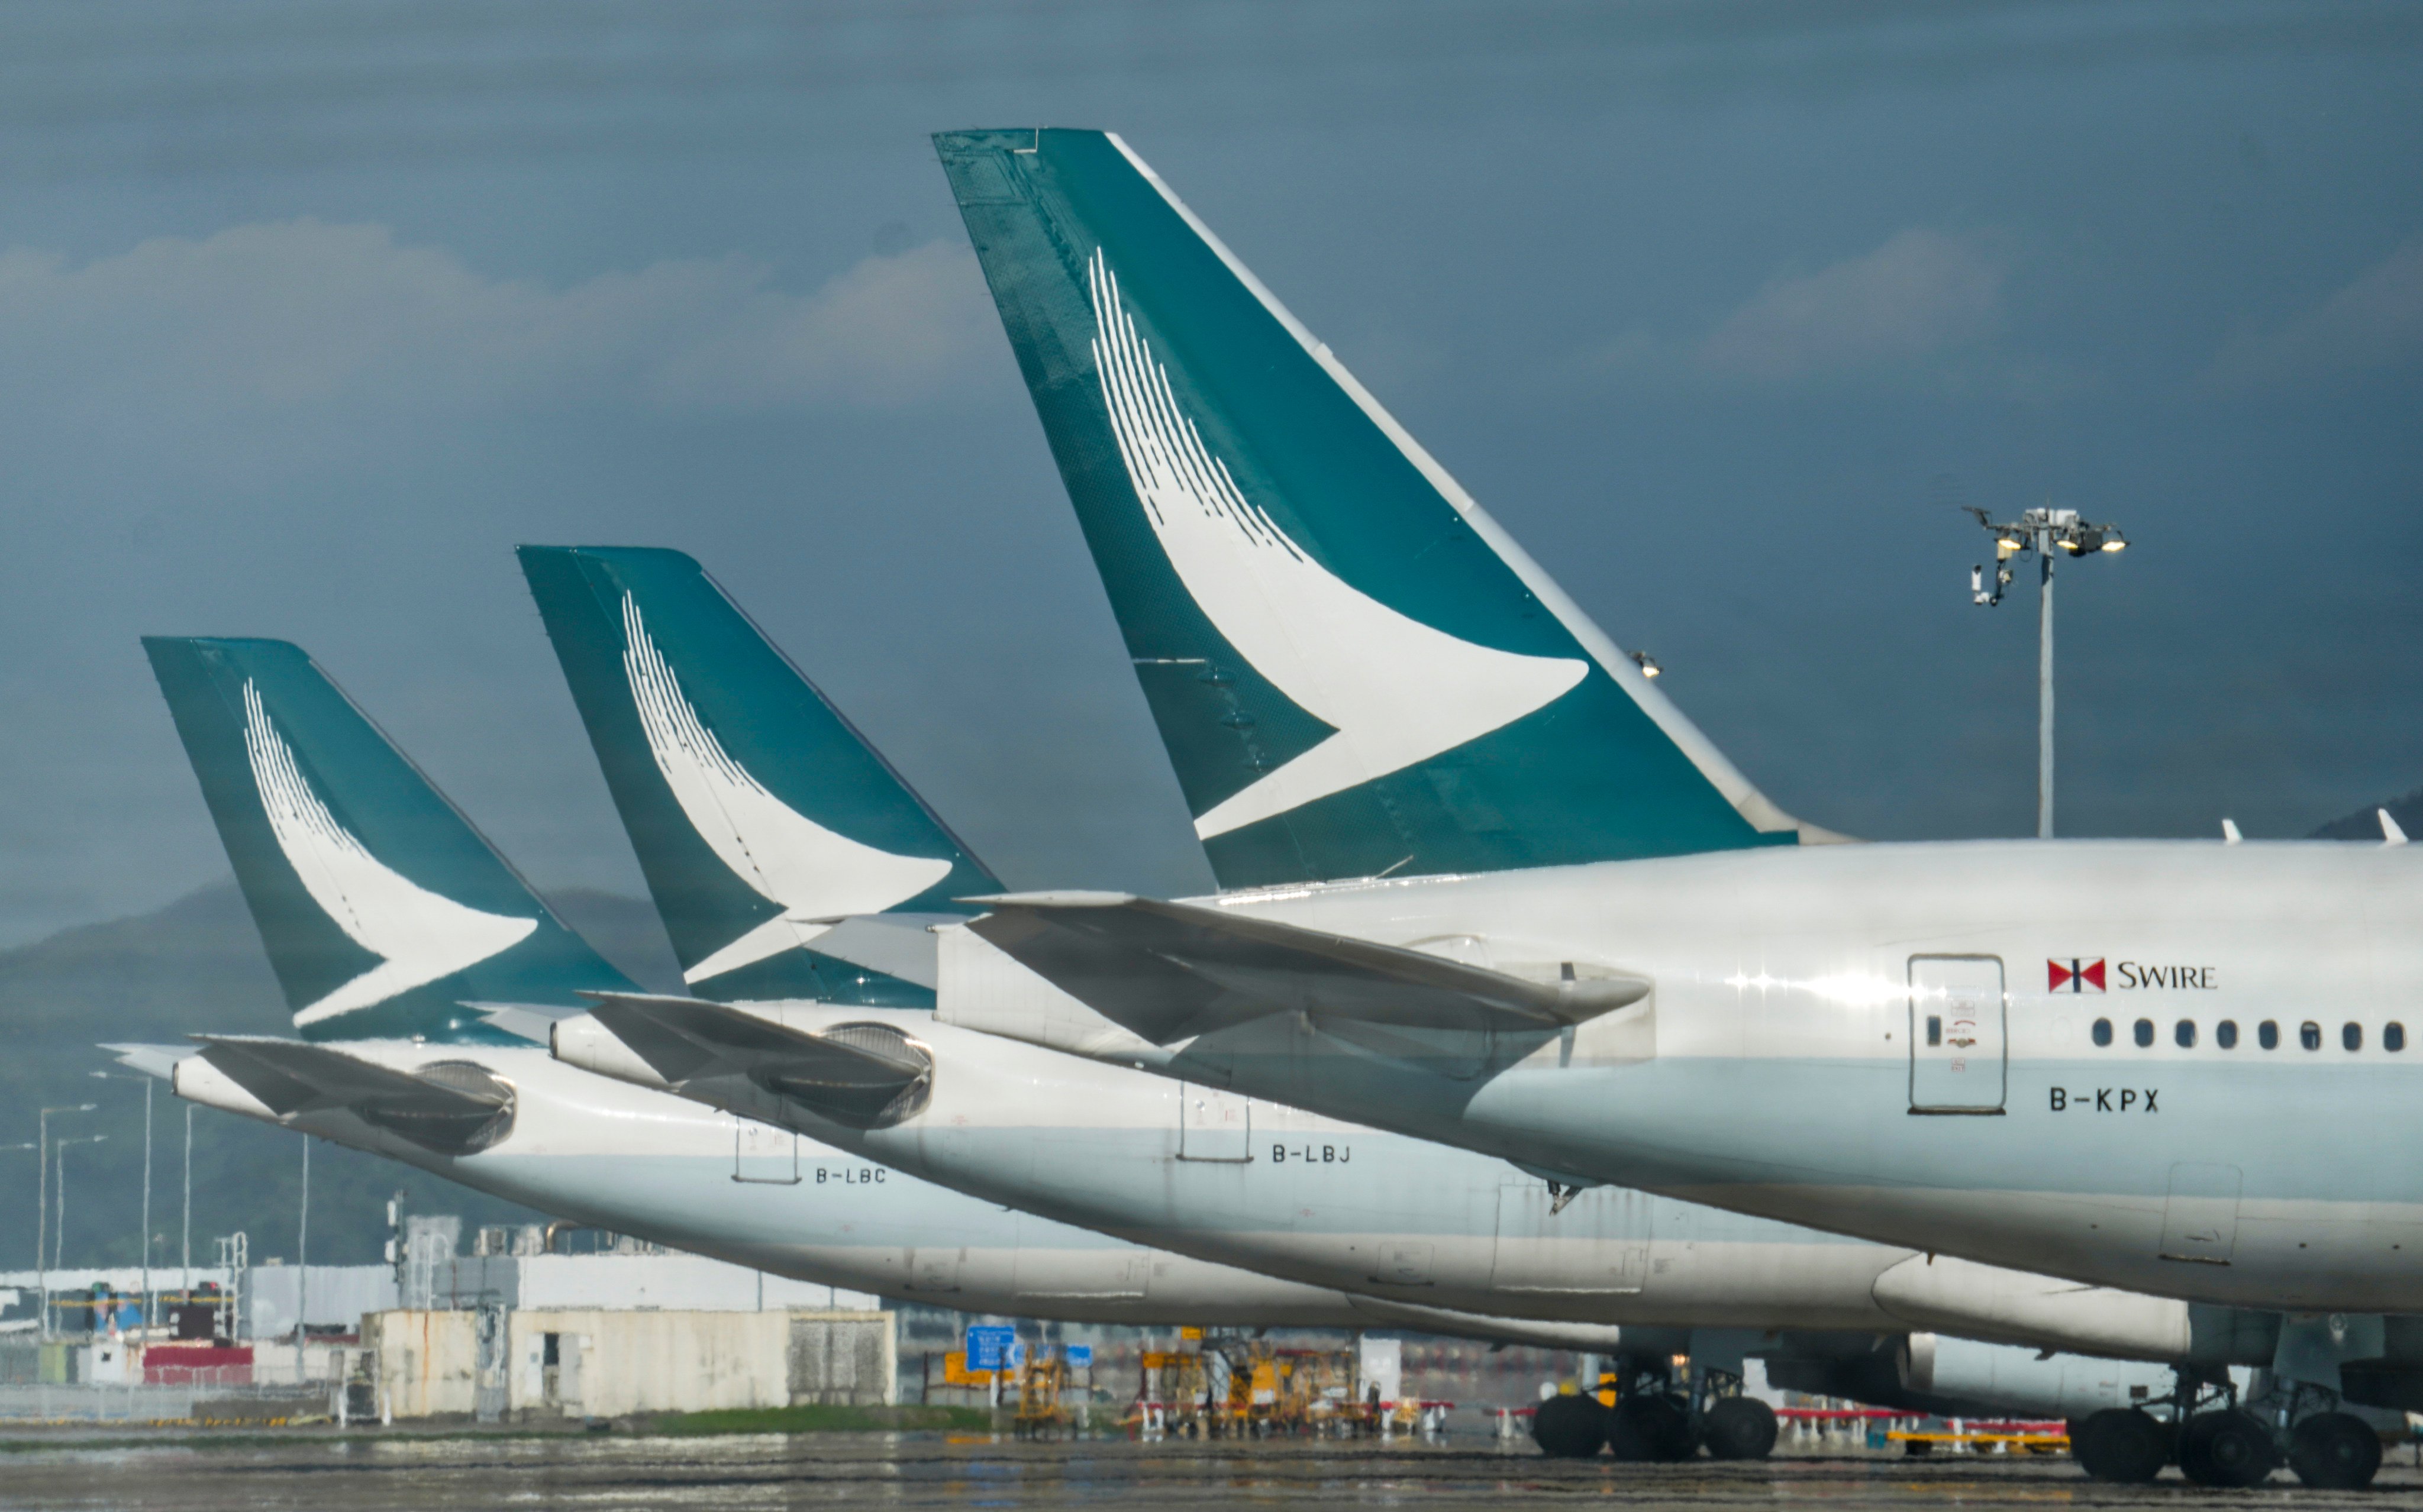 Cathay Pacific struggled to stay afloat when the global travel market collapsed during the pandemic. Photo: Sam Tsang